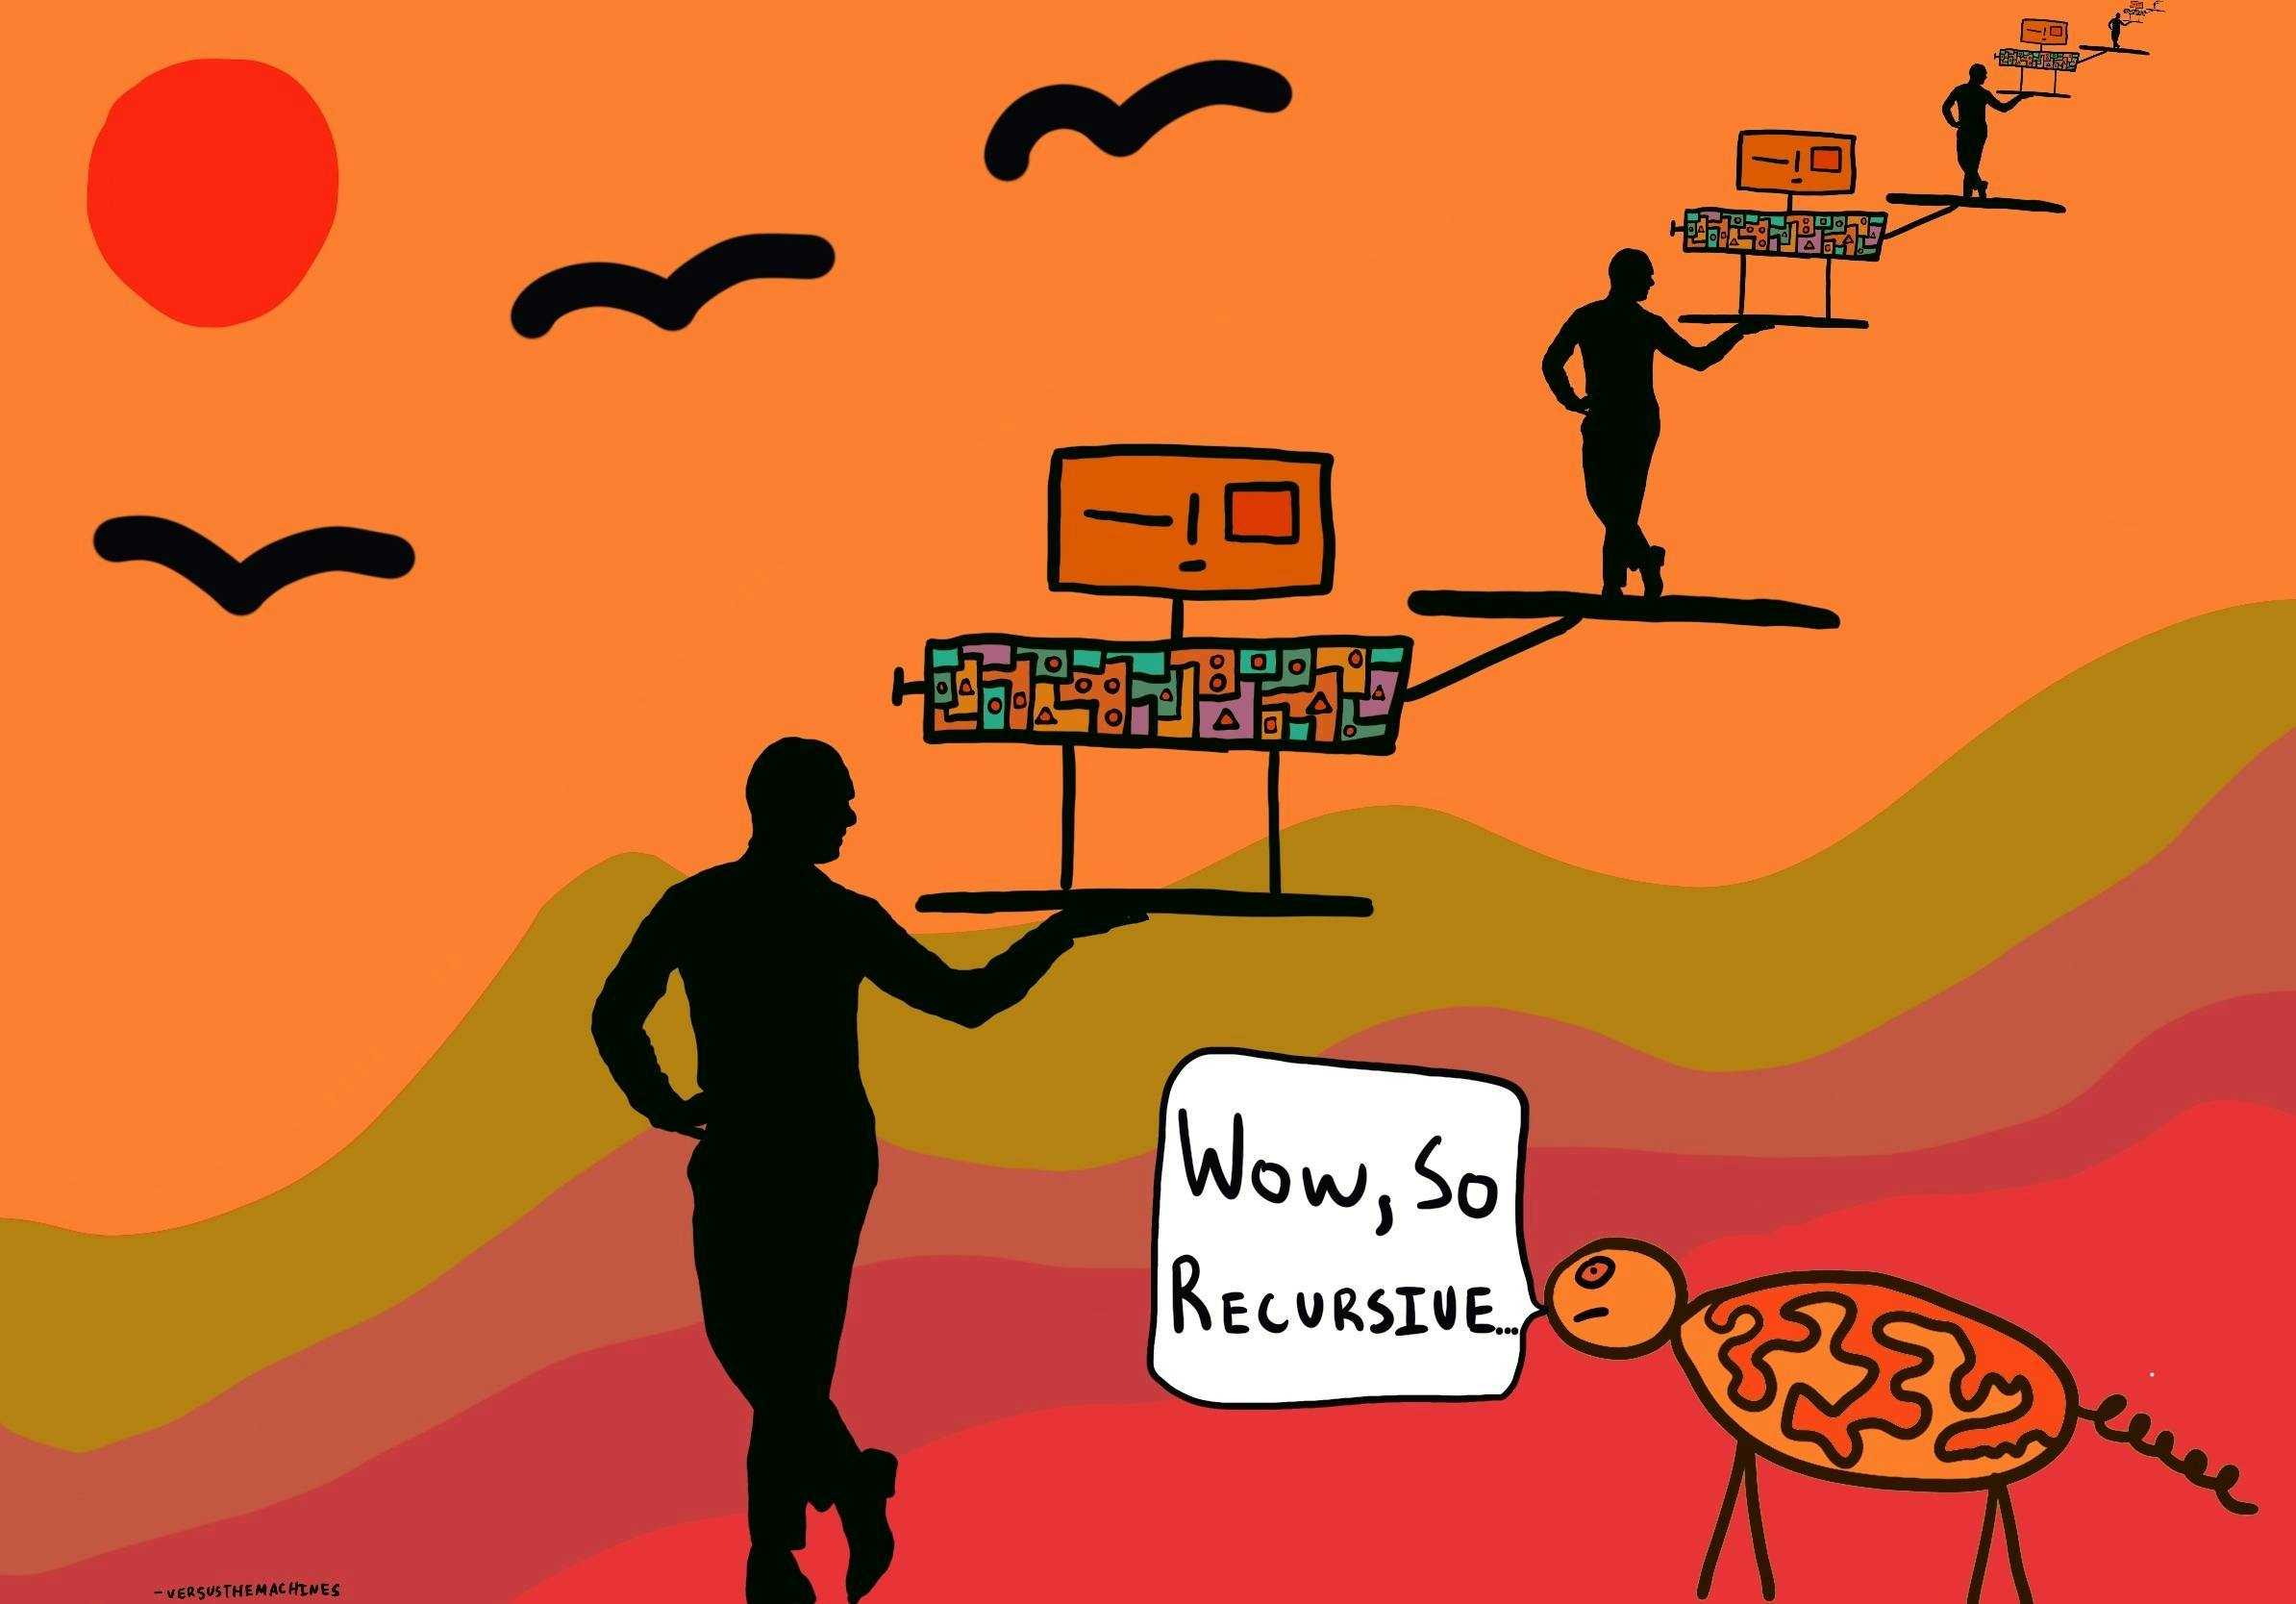 A silhouette of a person holds a platform displaying a computer, repeating into the distance against a colorful landscape. A speech bubble reads, "Wow, So Recursive..." accompanied by an abstract animal figure.